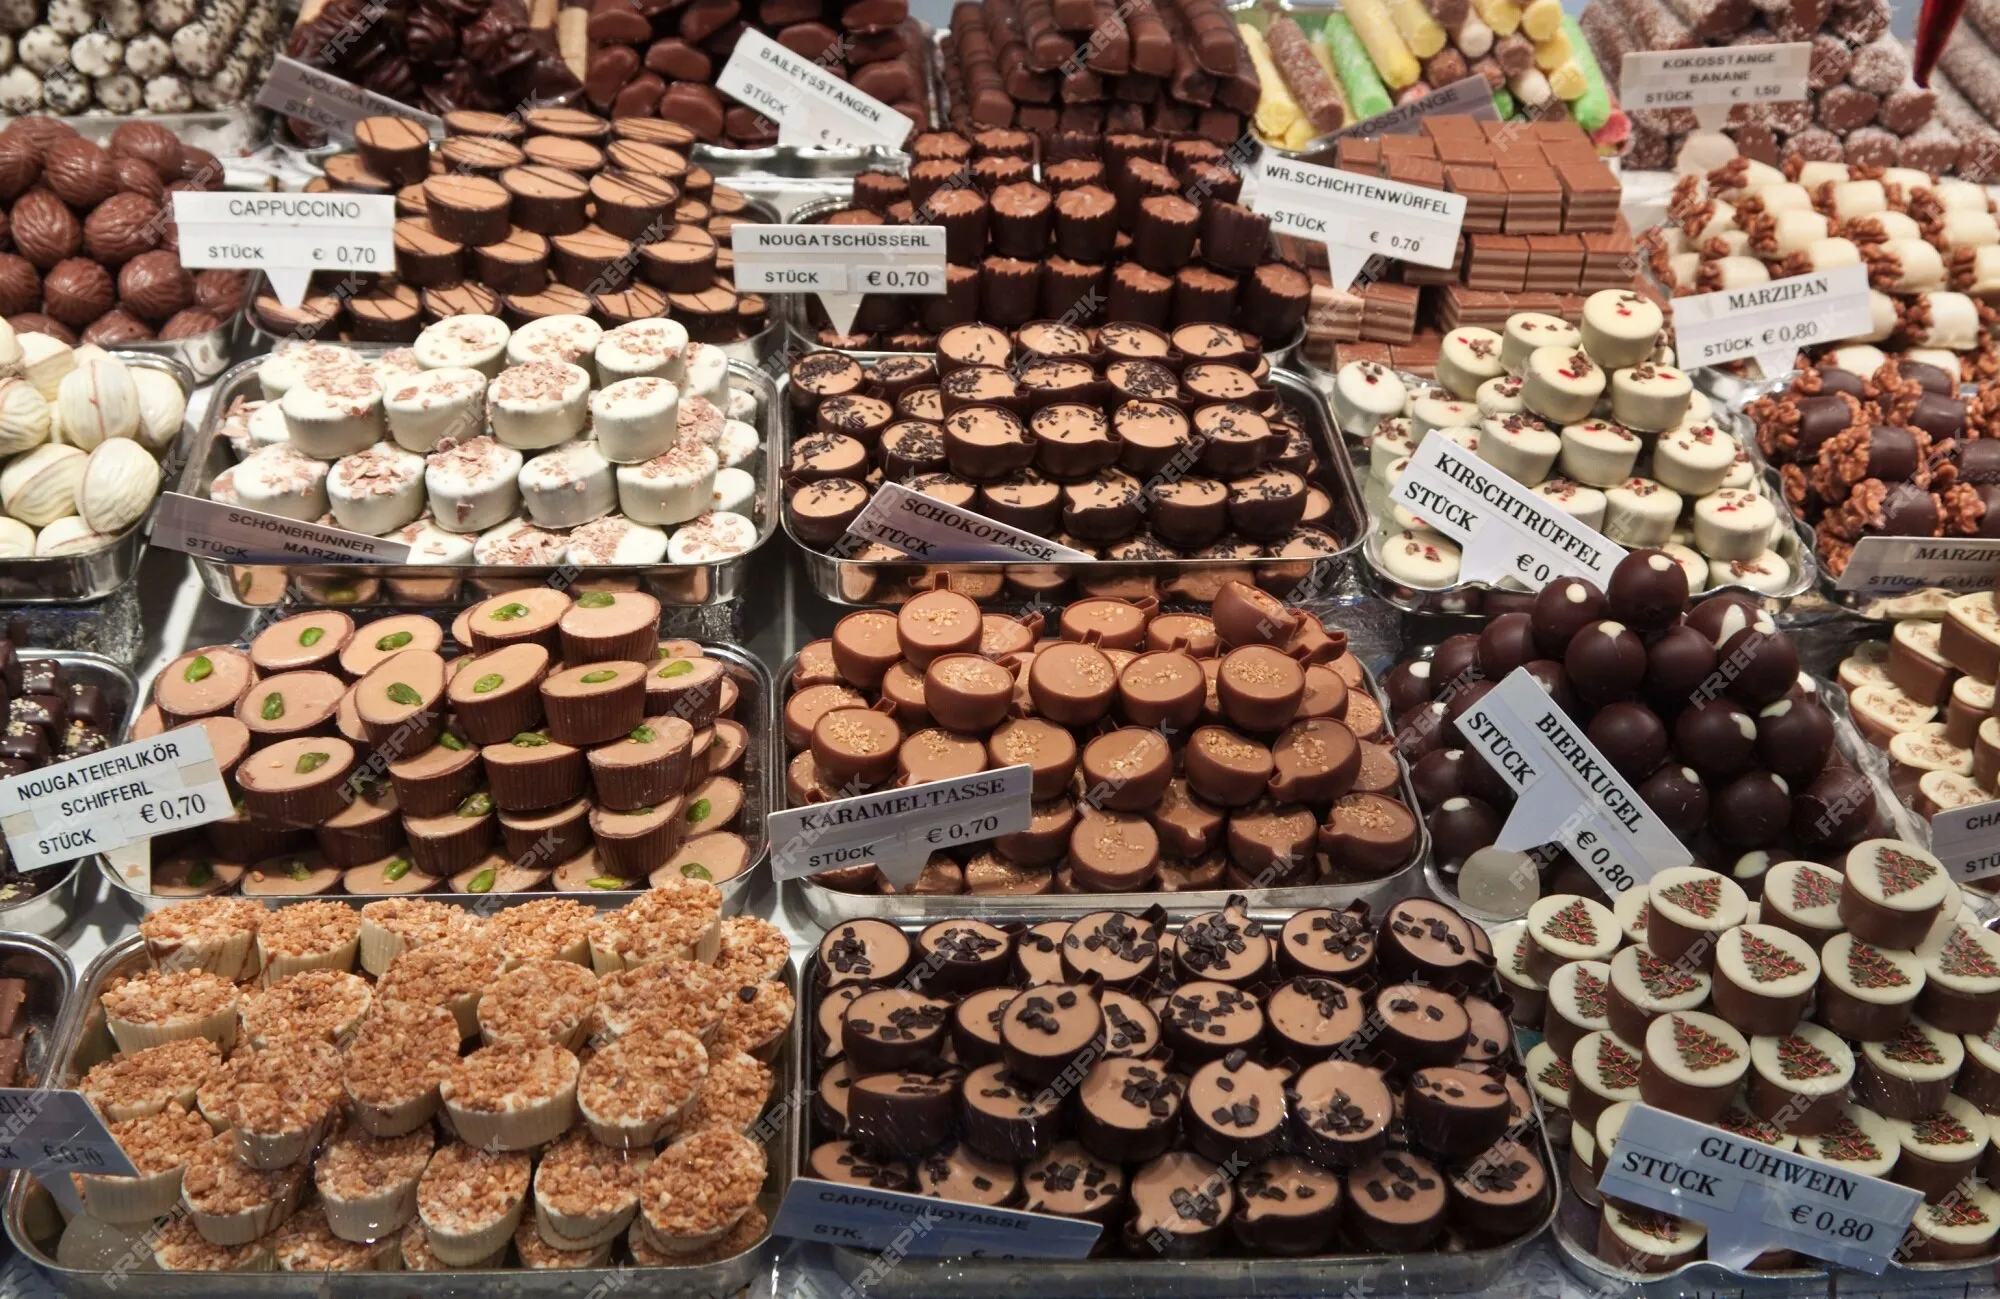 Chocolate Forge in Ukraine, europe | Sweets - Country Helper